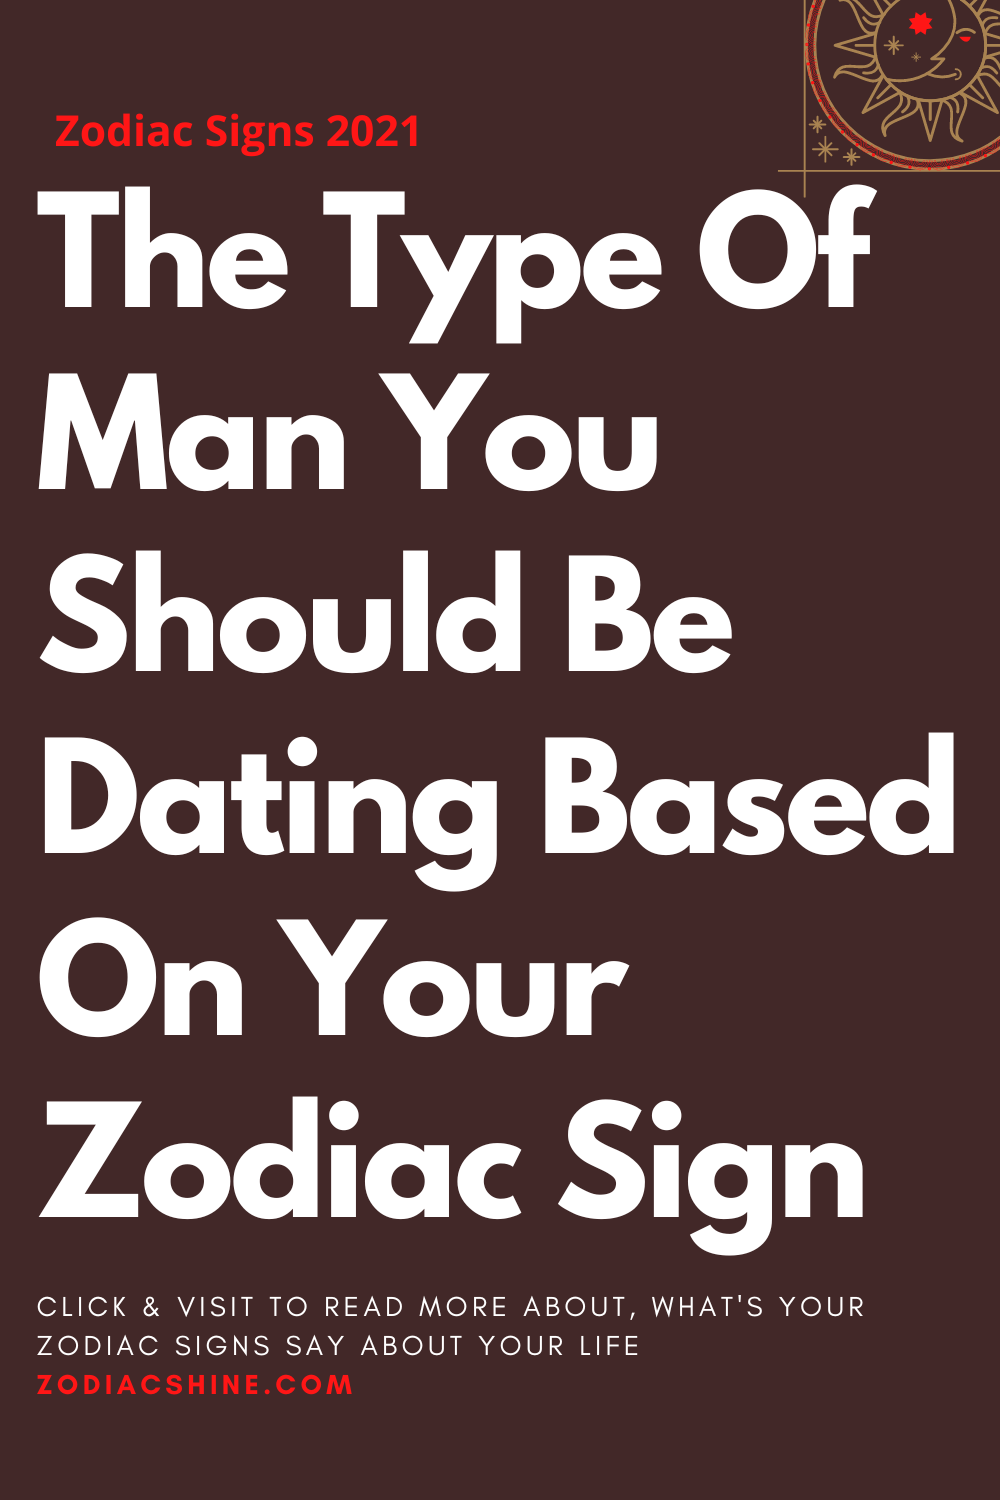 The Type Of Man You Should Be Dating Based On Your Zodiac Sign